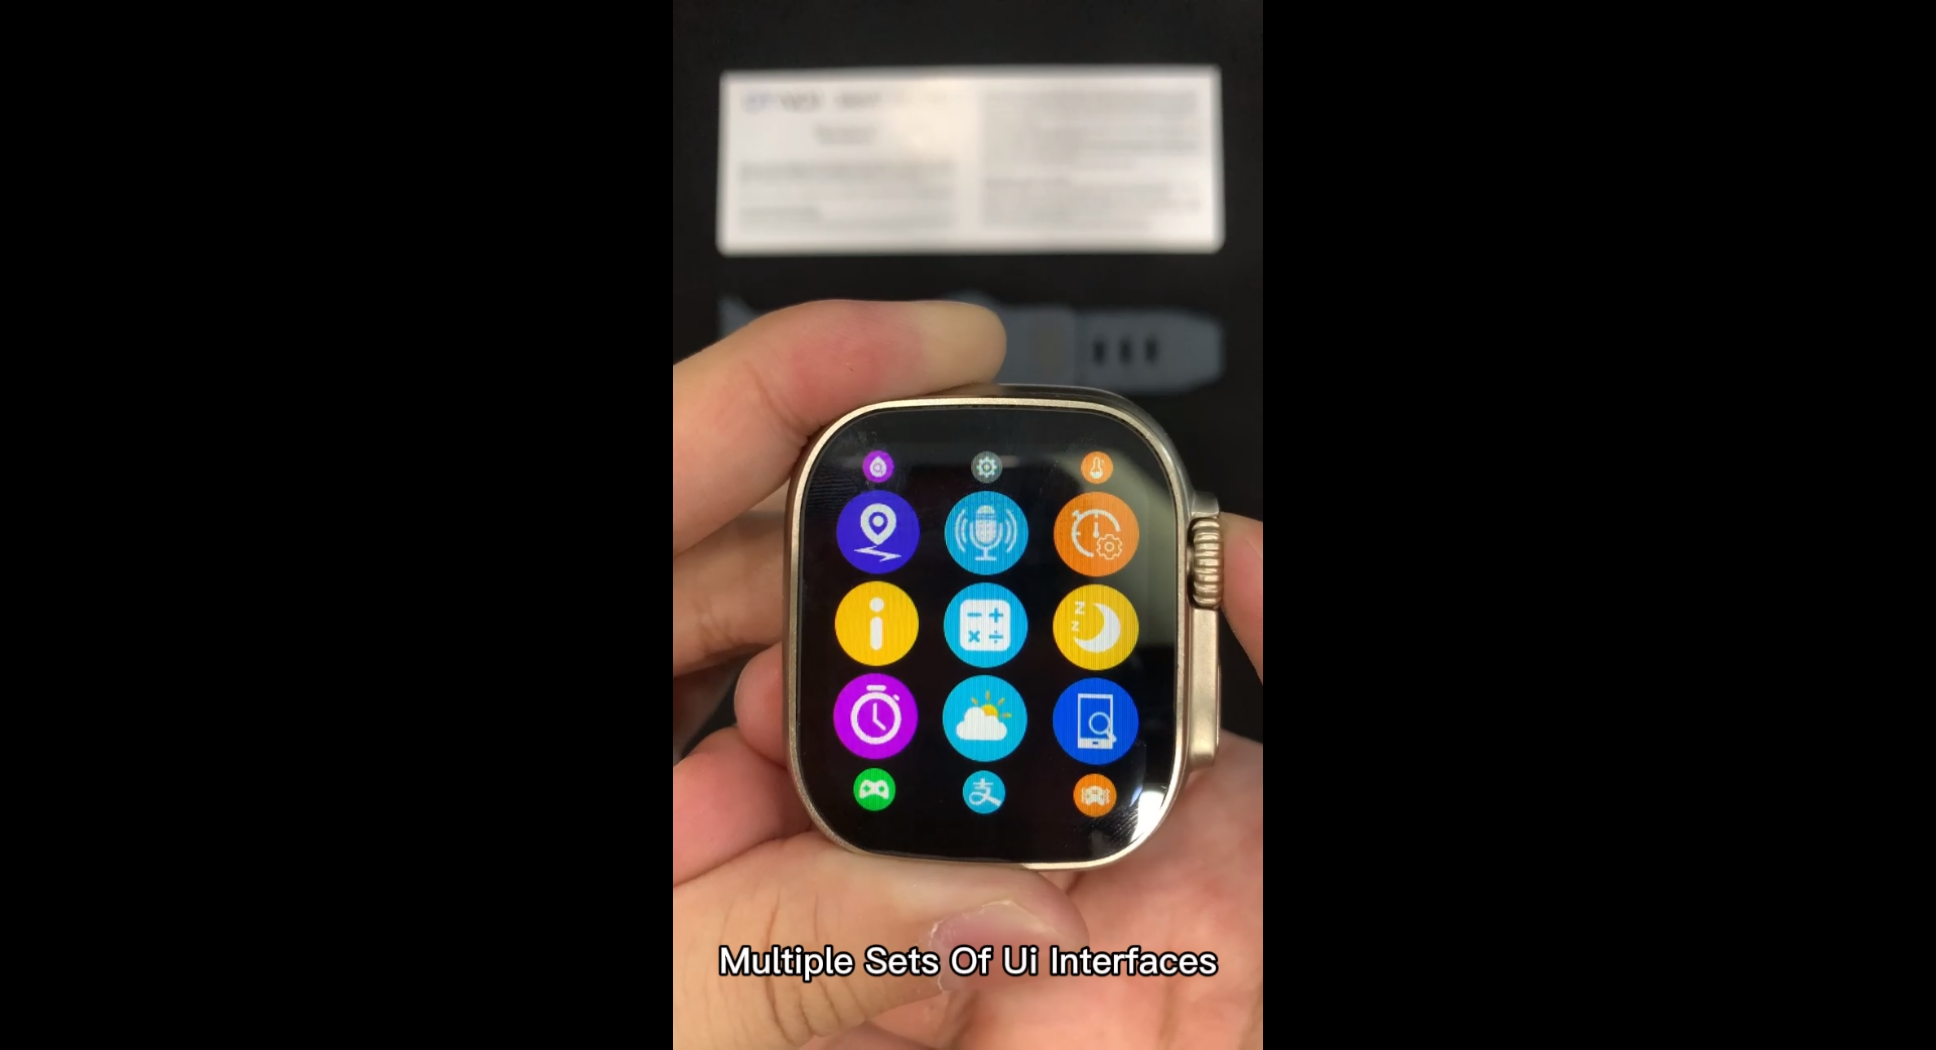 DT8 Ultra Smart Watch 2.0 Inches Display And NFC Function-Shenzhen Shengye Technology Co.,Ltd